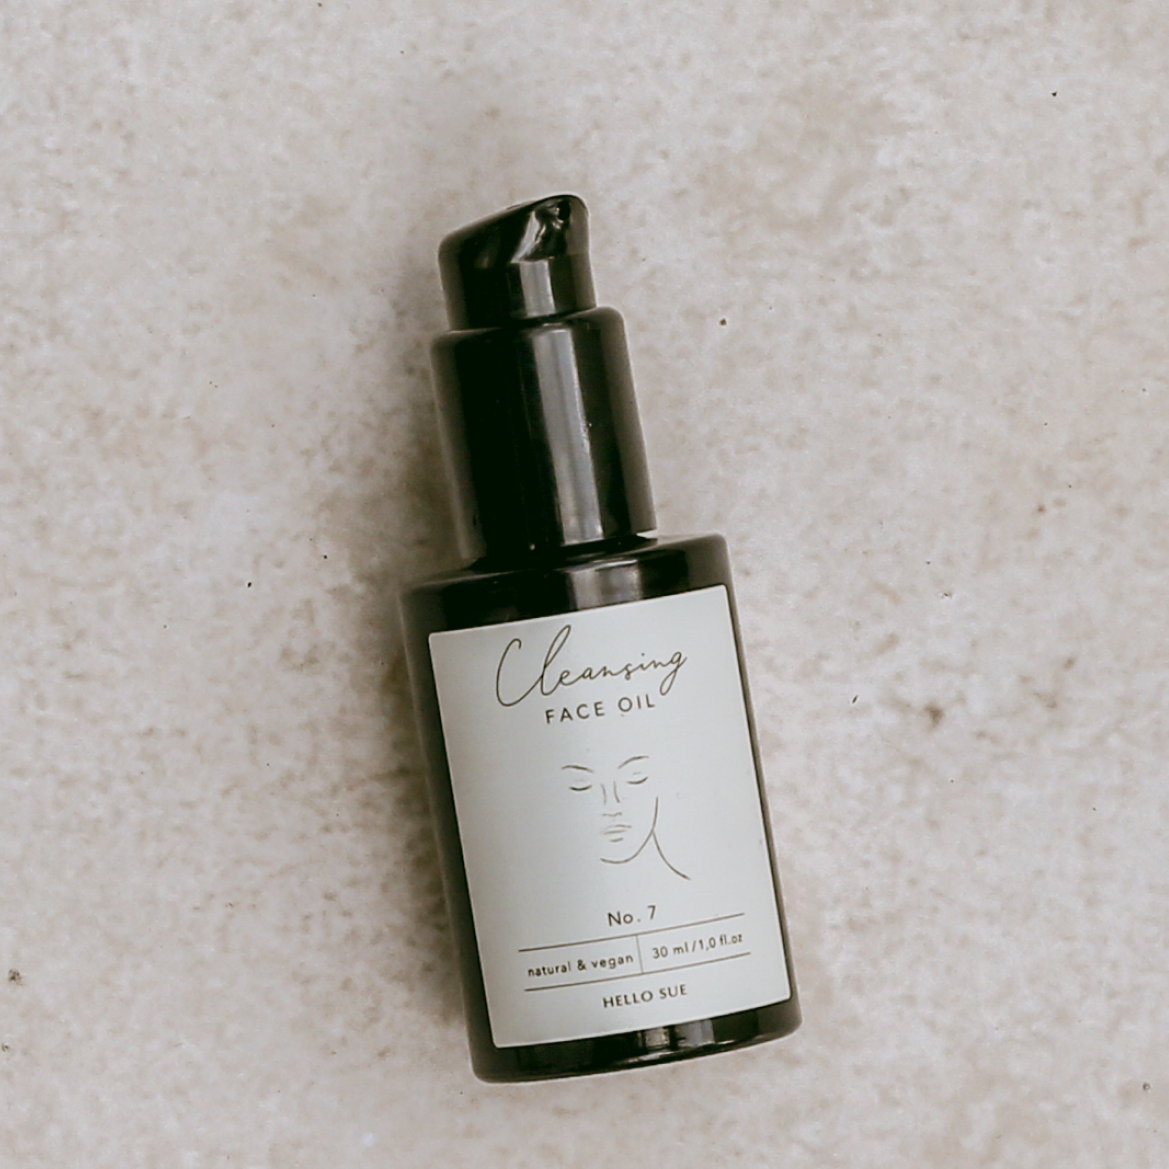 No. 7 Cleansing Face Oil